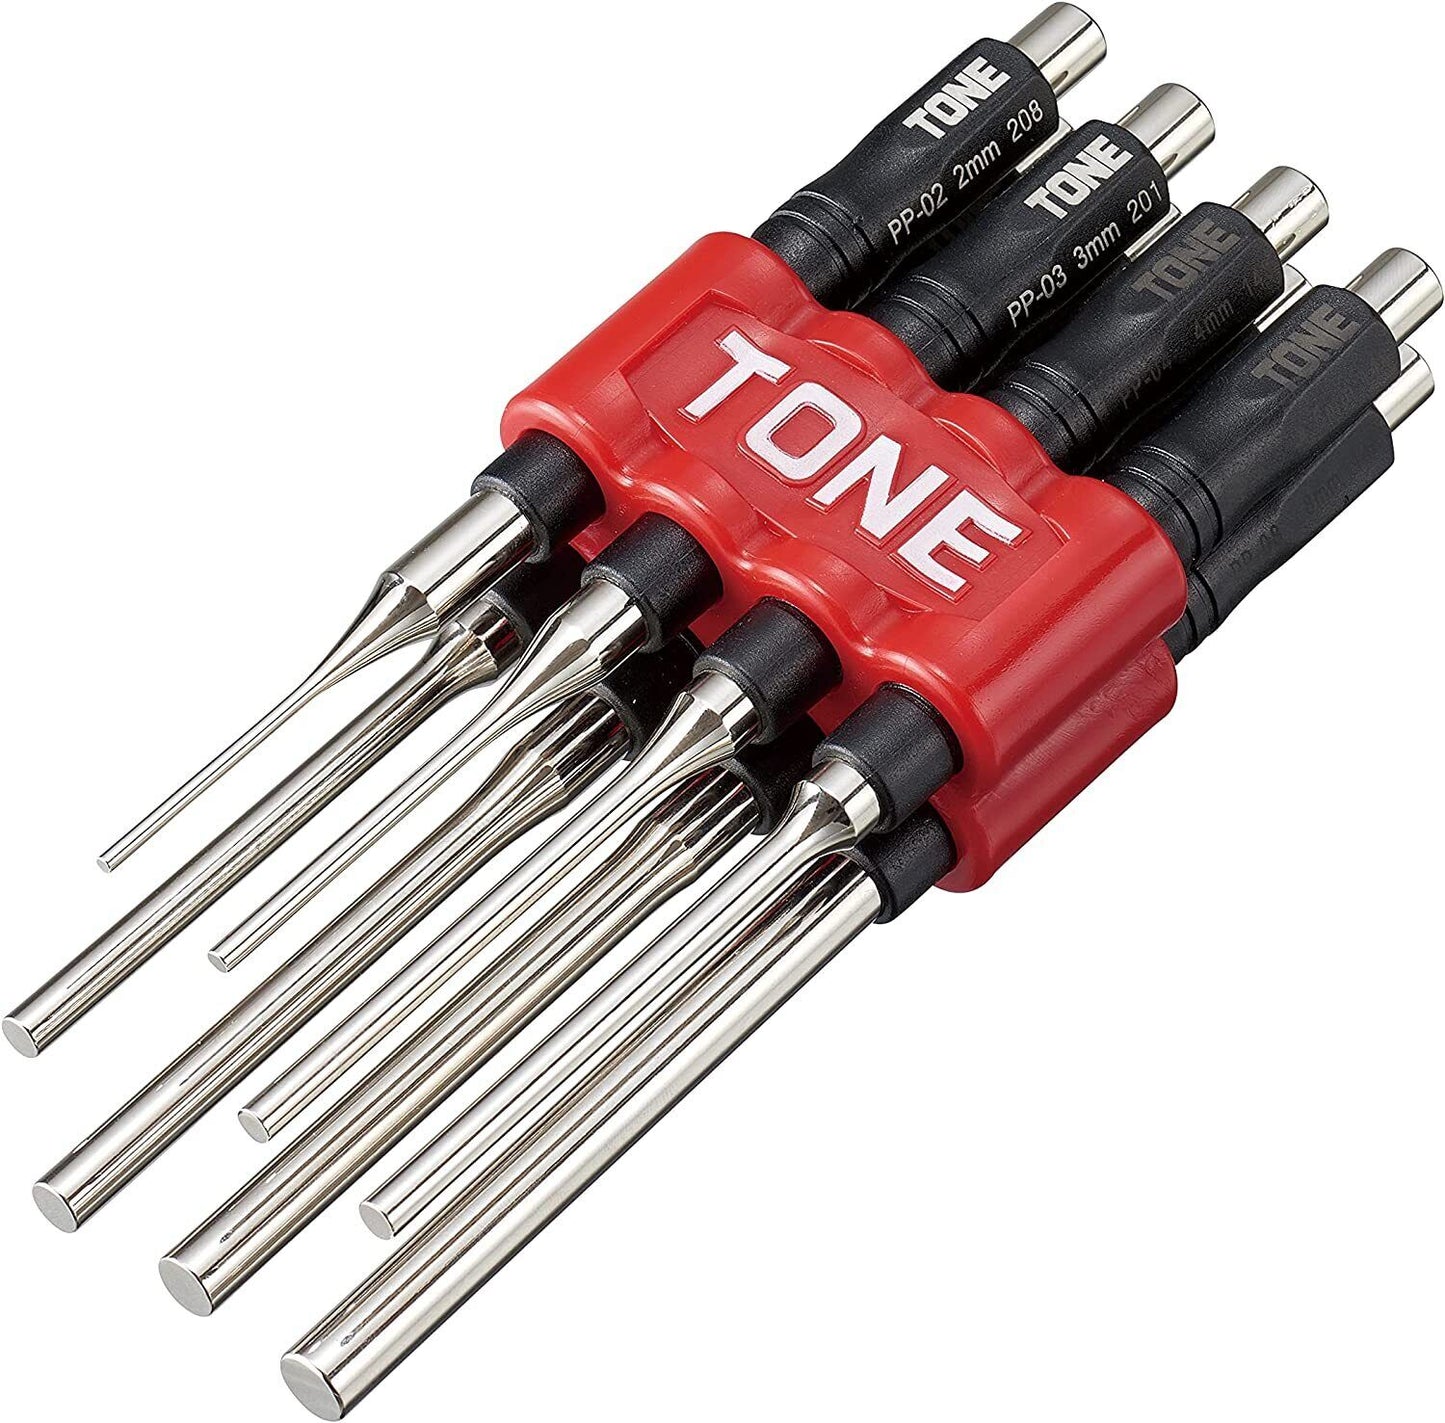 PP800P TONE Pin Punch Set Holder Red Contents 8 Hammer Pin Punch Tools New